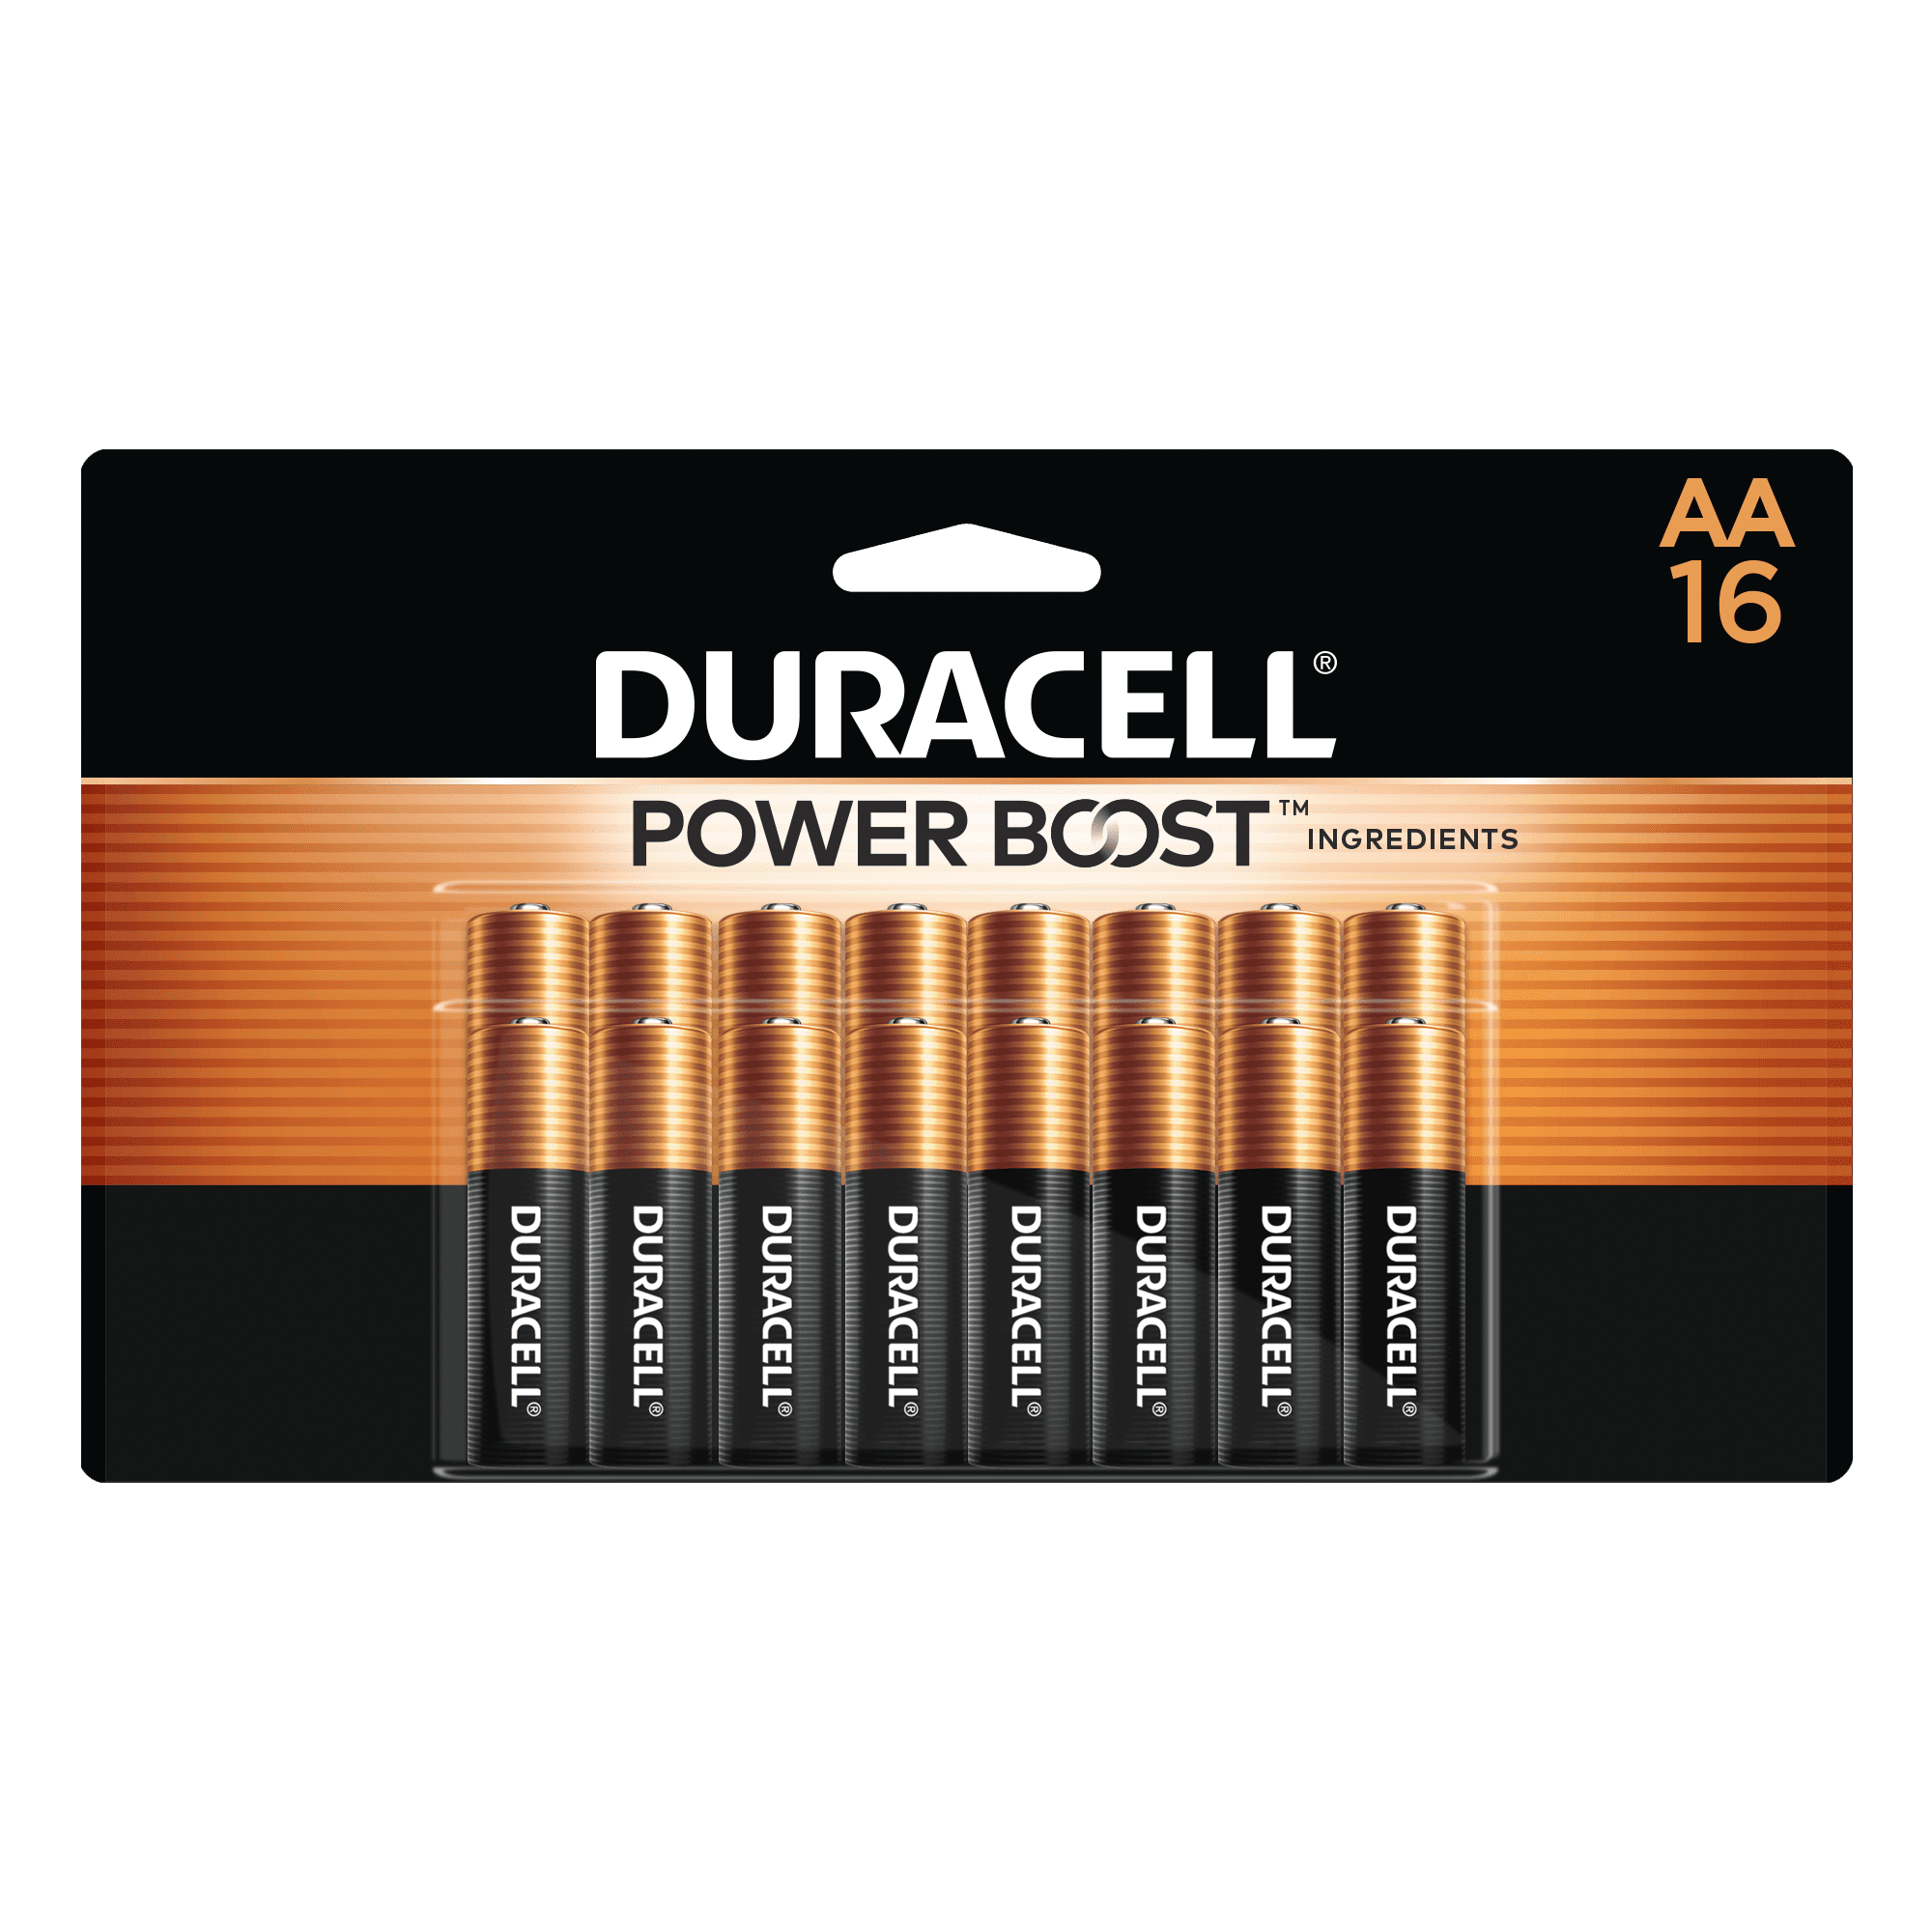 Duracell Coppertop AA Battery with POWER BOOST, 16 Pack Long-Lasting Batteries